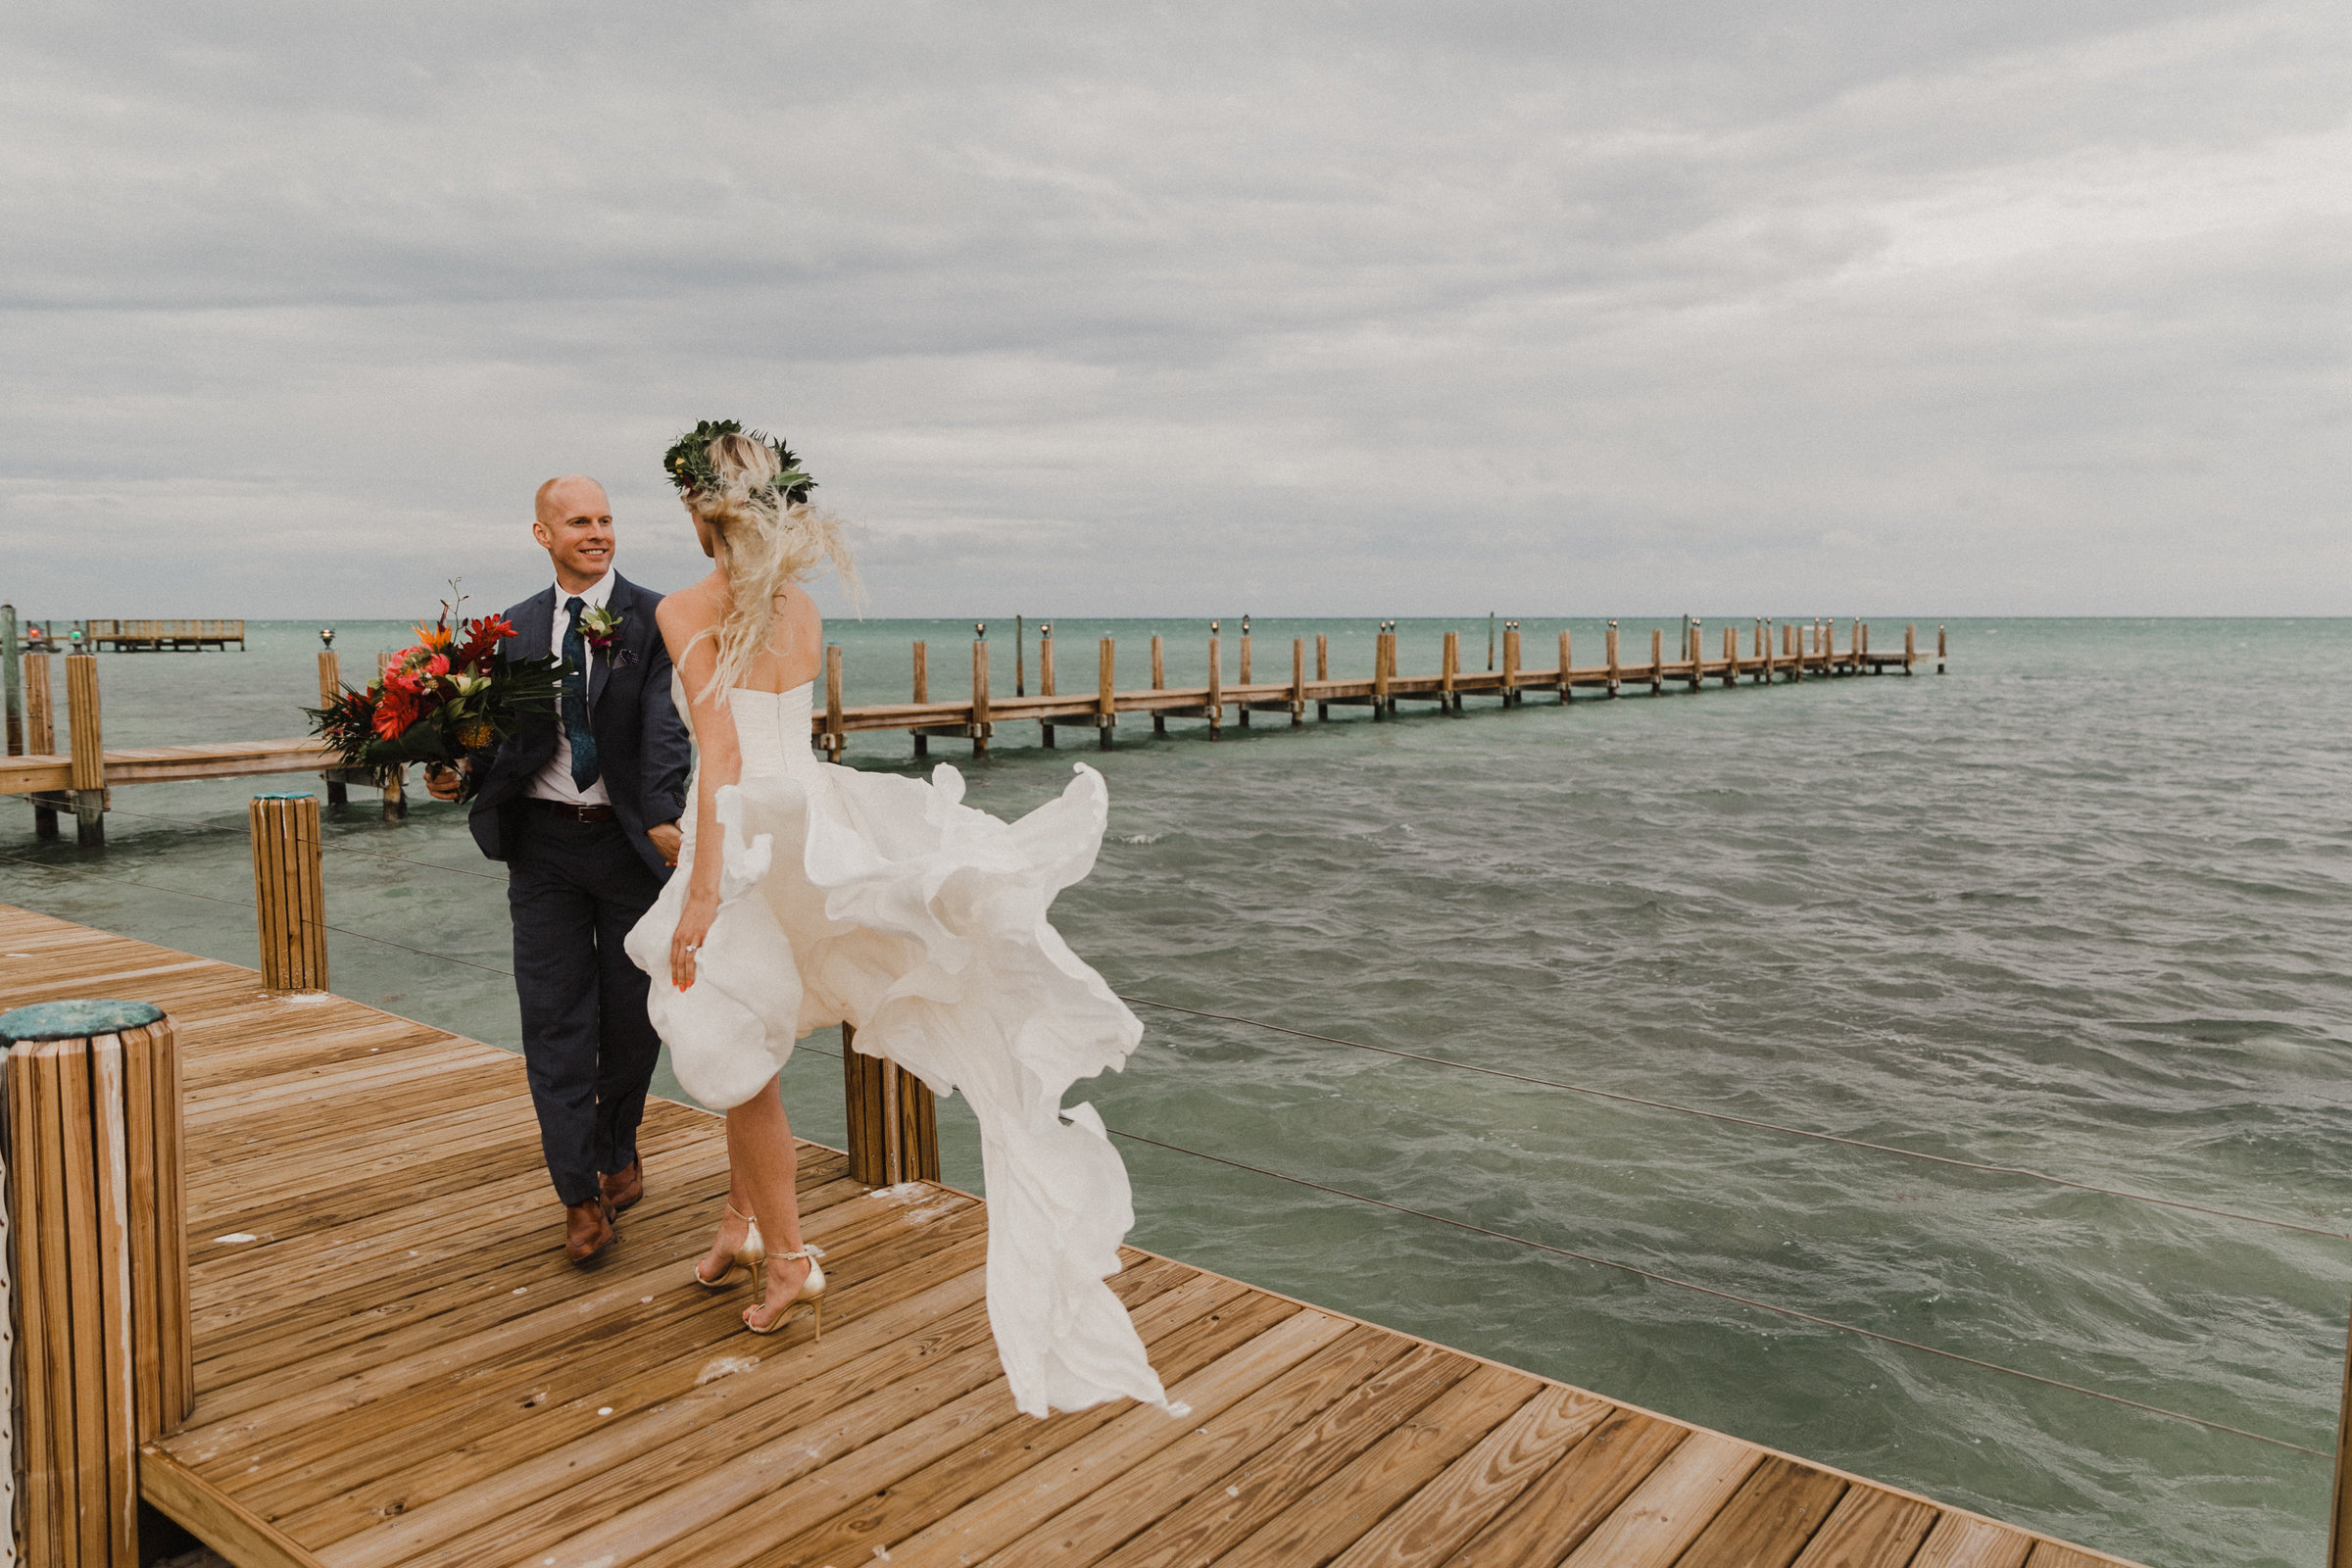 wind plays with bride and groom during photo session